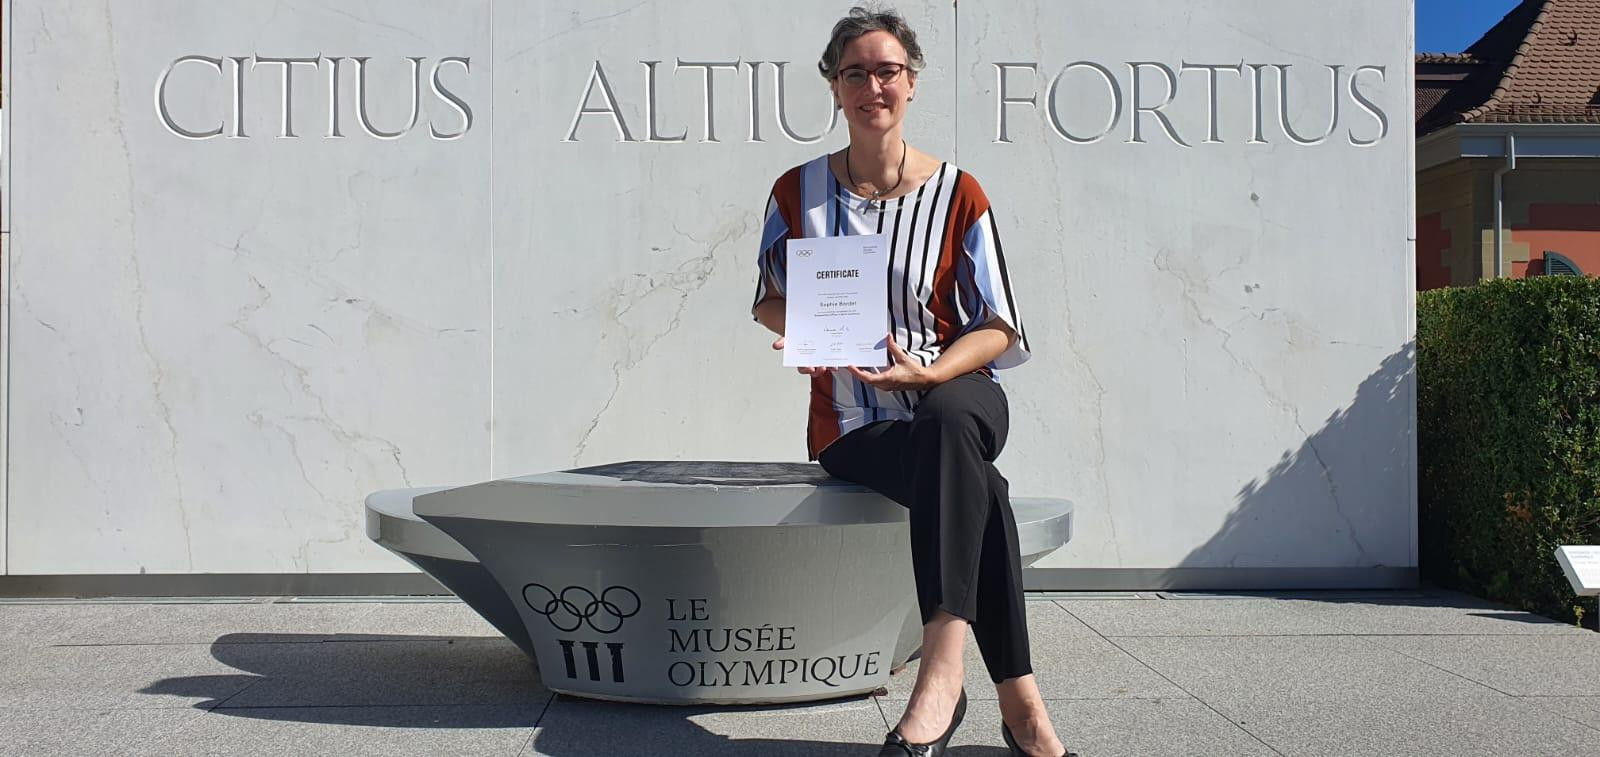 IOC-certified safeguarding officer Sophie Bordet explained how education can help young athletes 